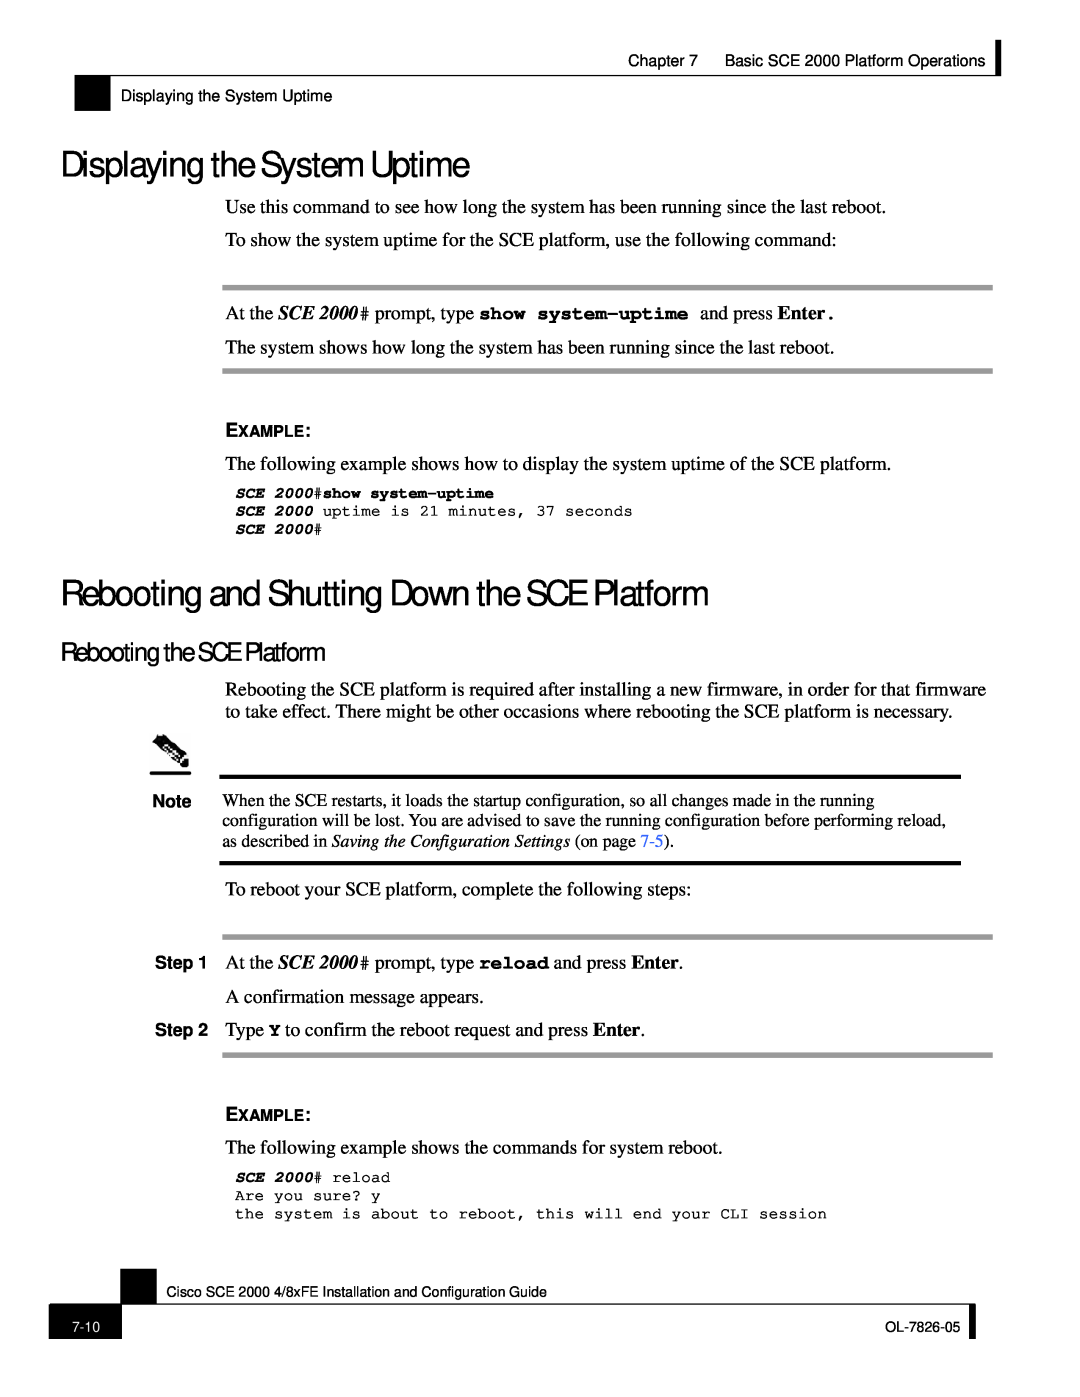 Cisco Systems SCE 2000 4/8xFE manual Displaying the System Uptime, Rebooting and Shutting Down the SCE Platform 